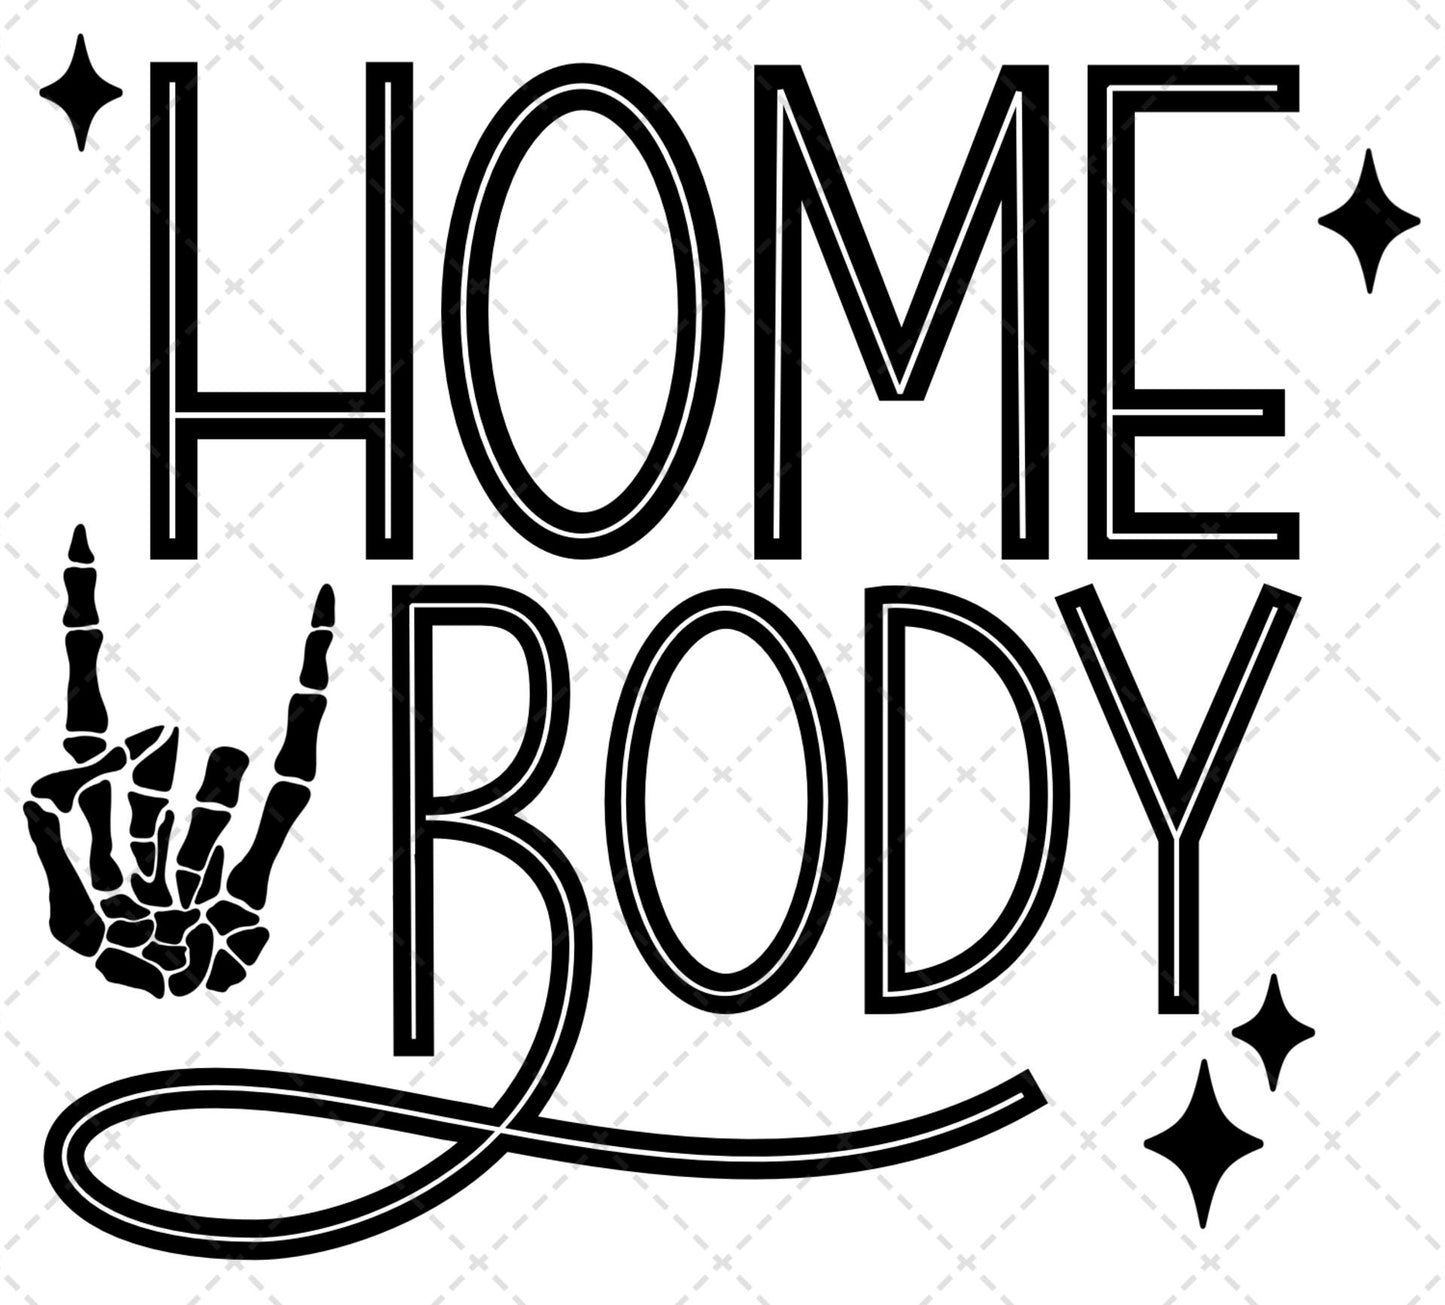 Home Body Black **TWO PART* SOLD SEPARATELY** Transfer